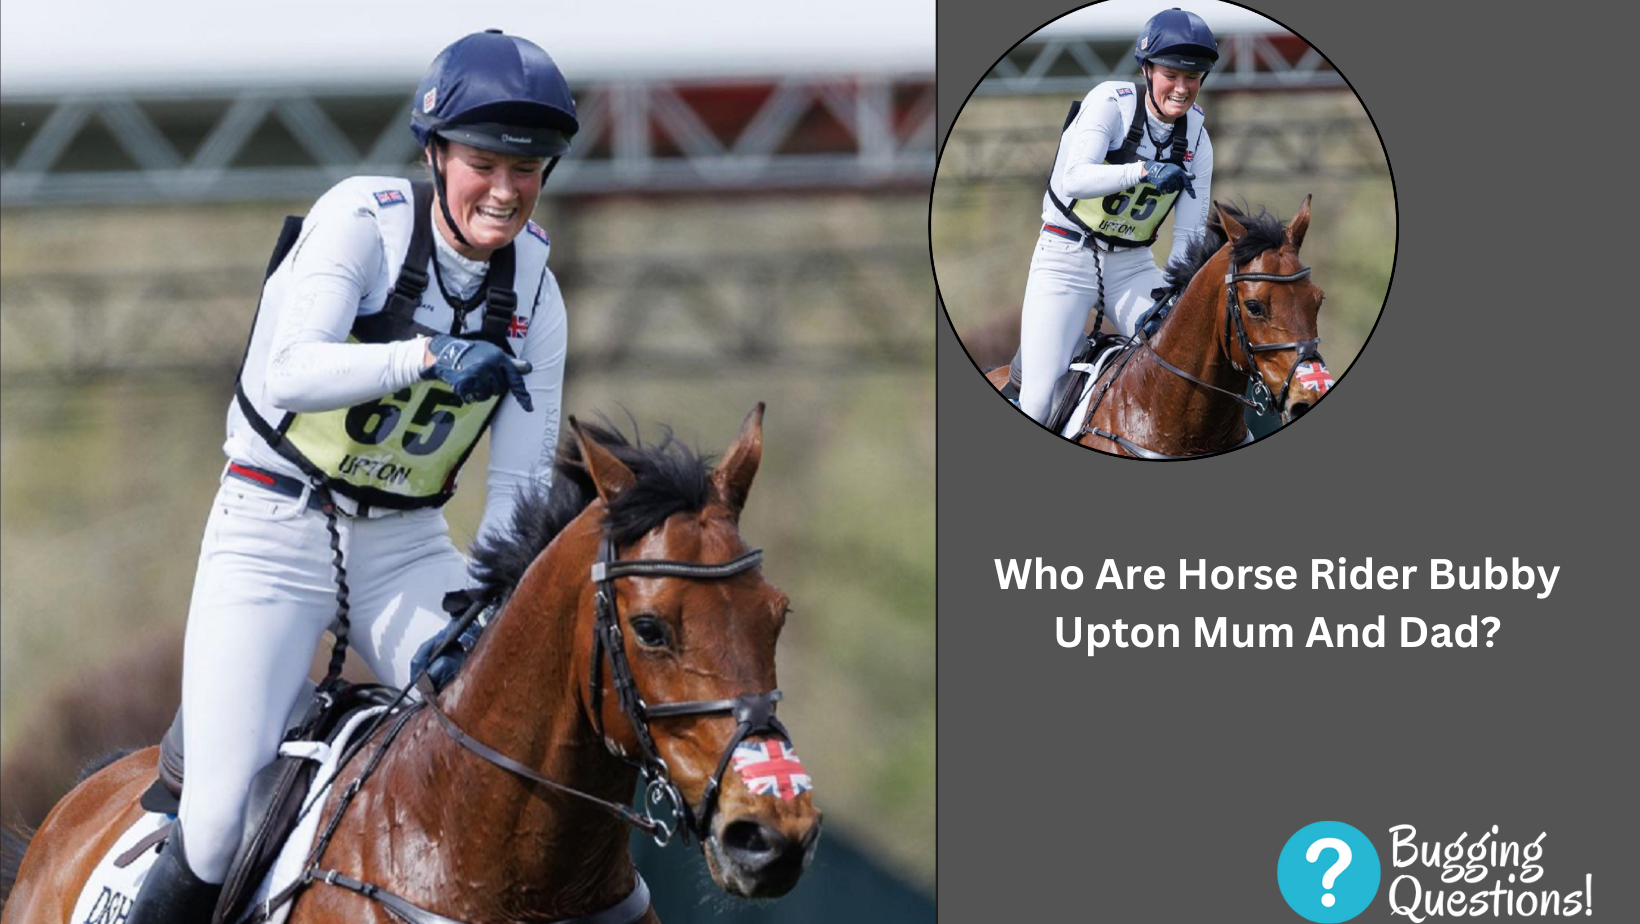 Who Are Horse Rider Bubby Upton Mum And Dad?